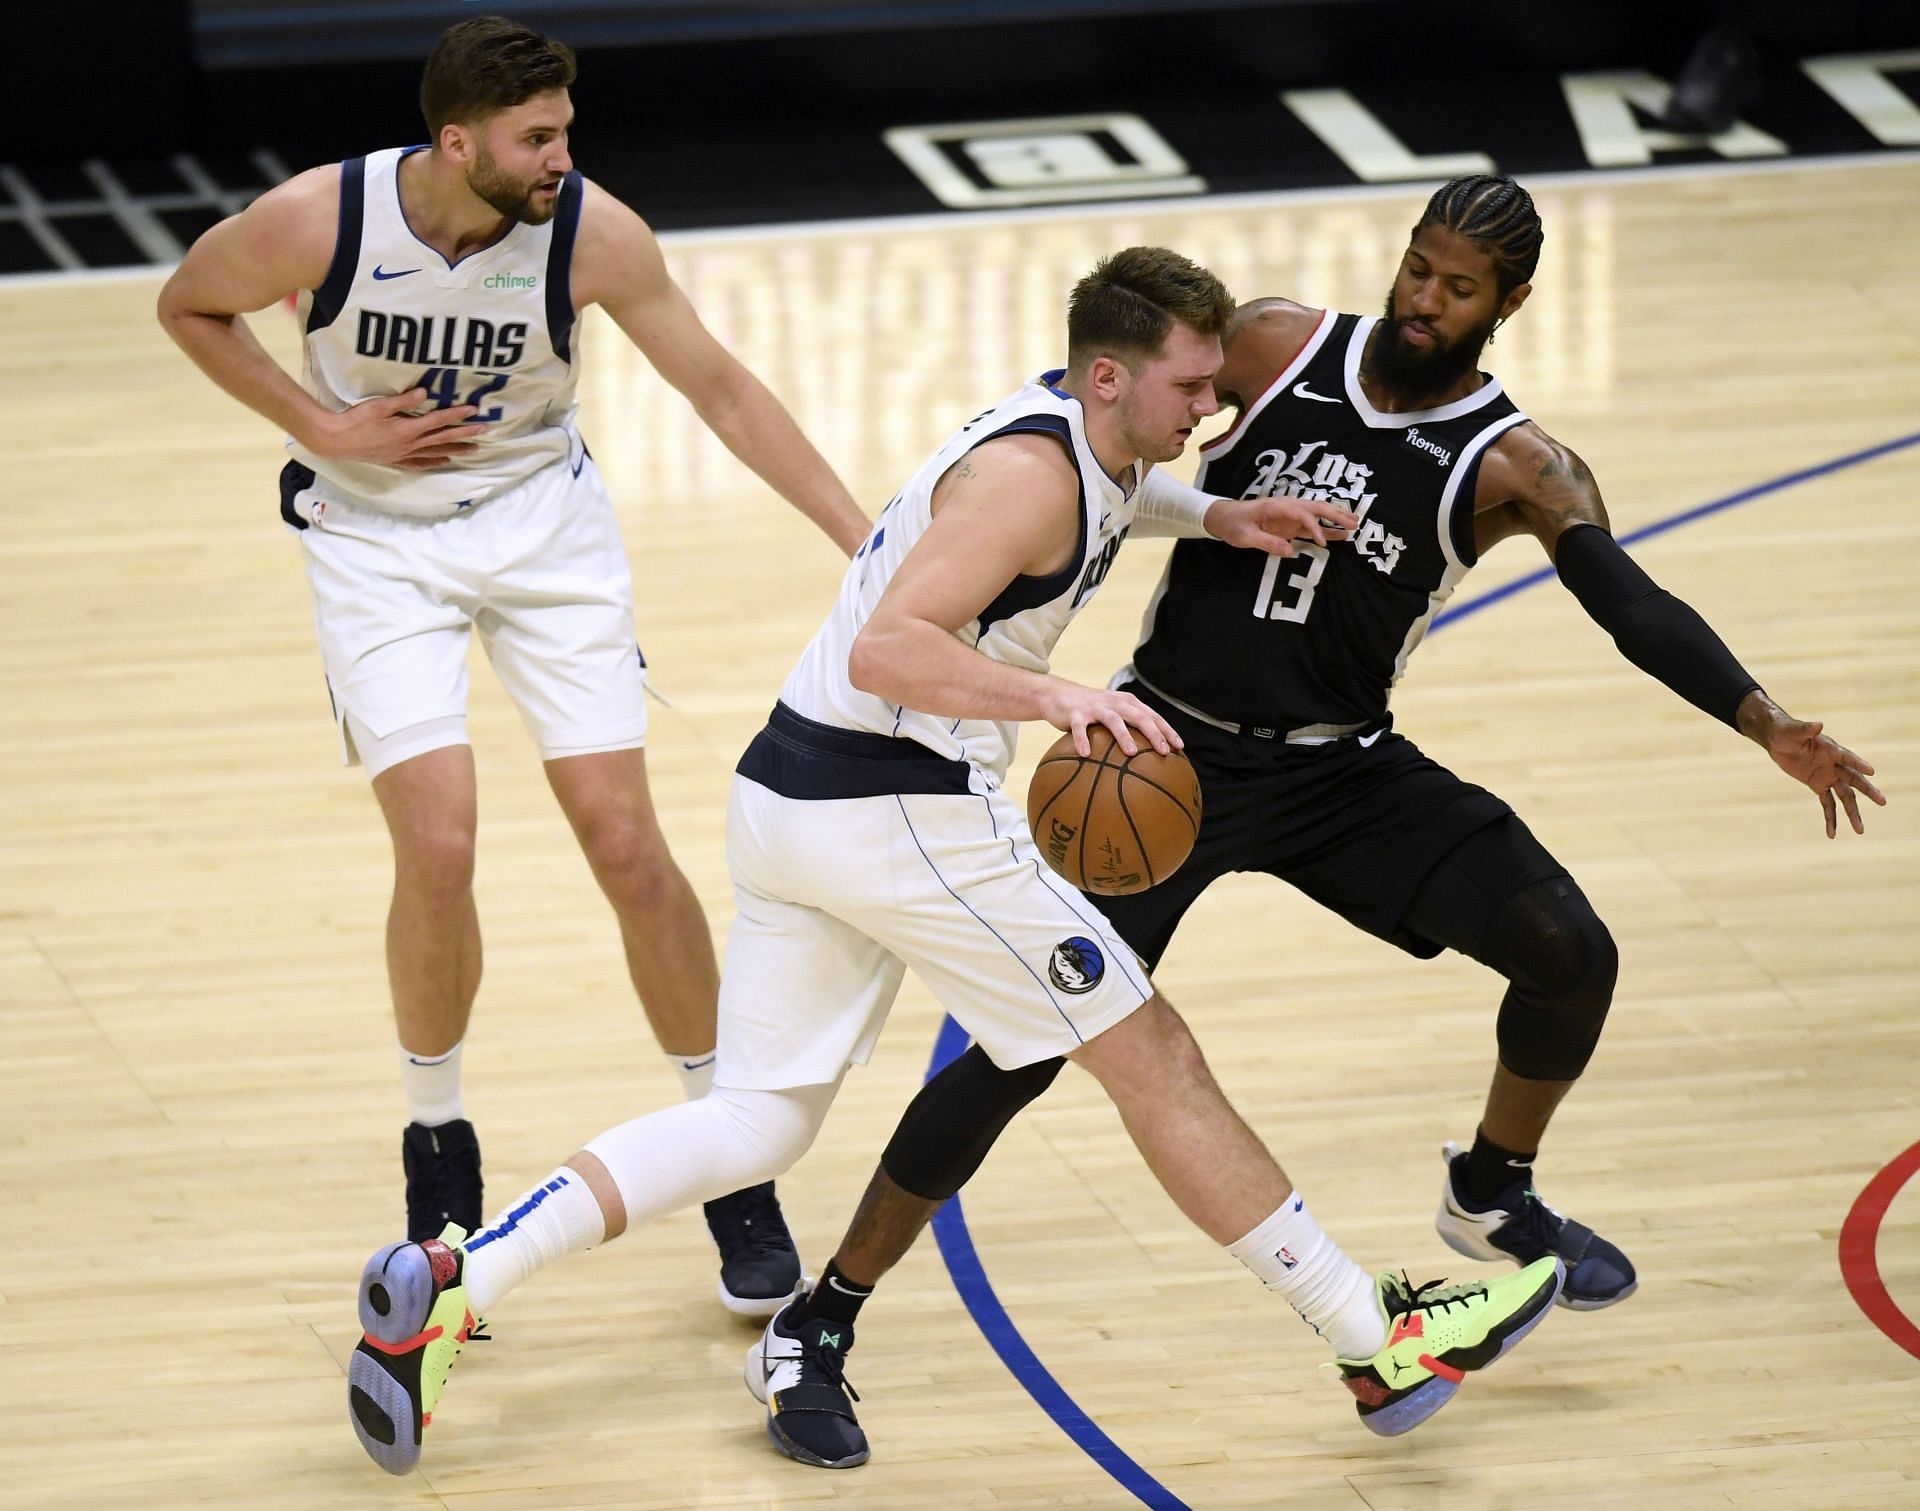 Dallas Mavericks against the LA Clippers in the 2021 NBA playoffs